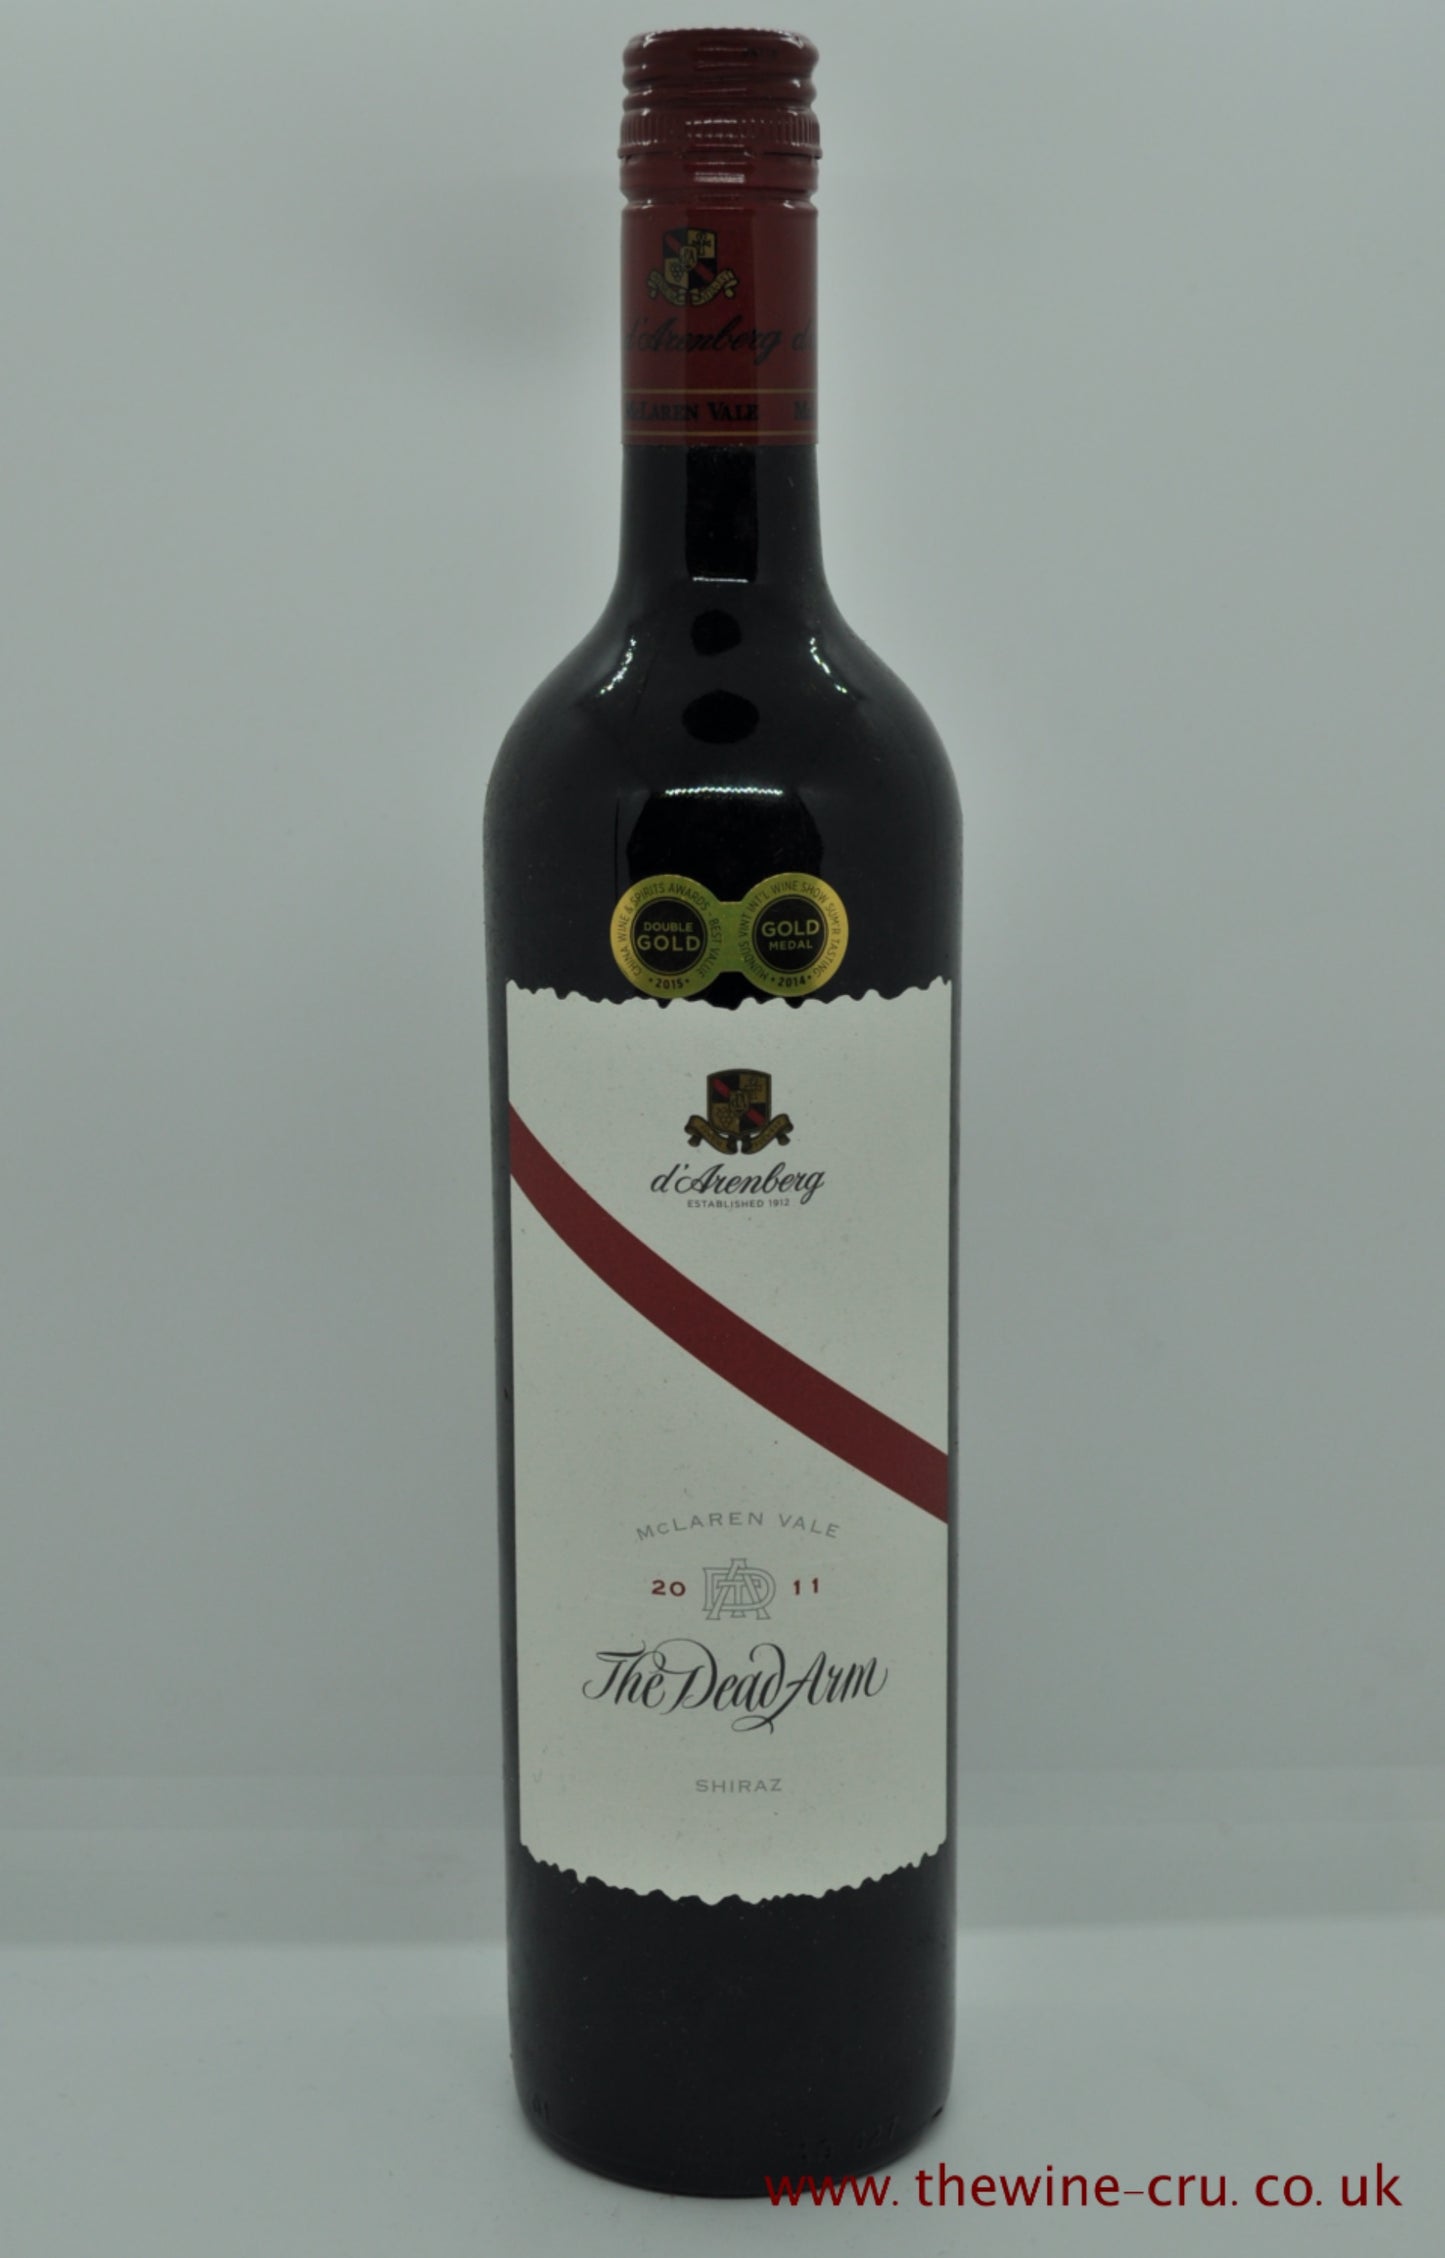 2011 vintage red wine. d'Arenberg The Dead Arm 2011. Immediate delivery. Free local delivery. Gift wrapping available.